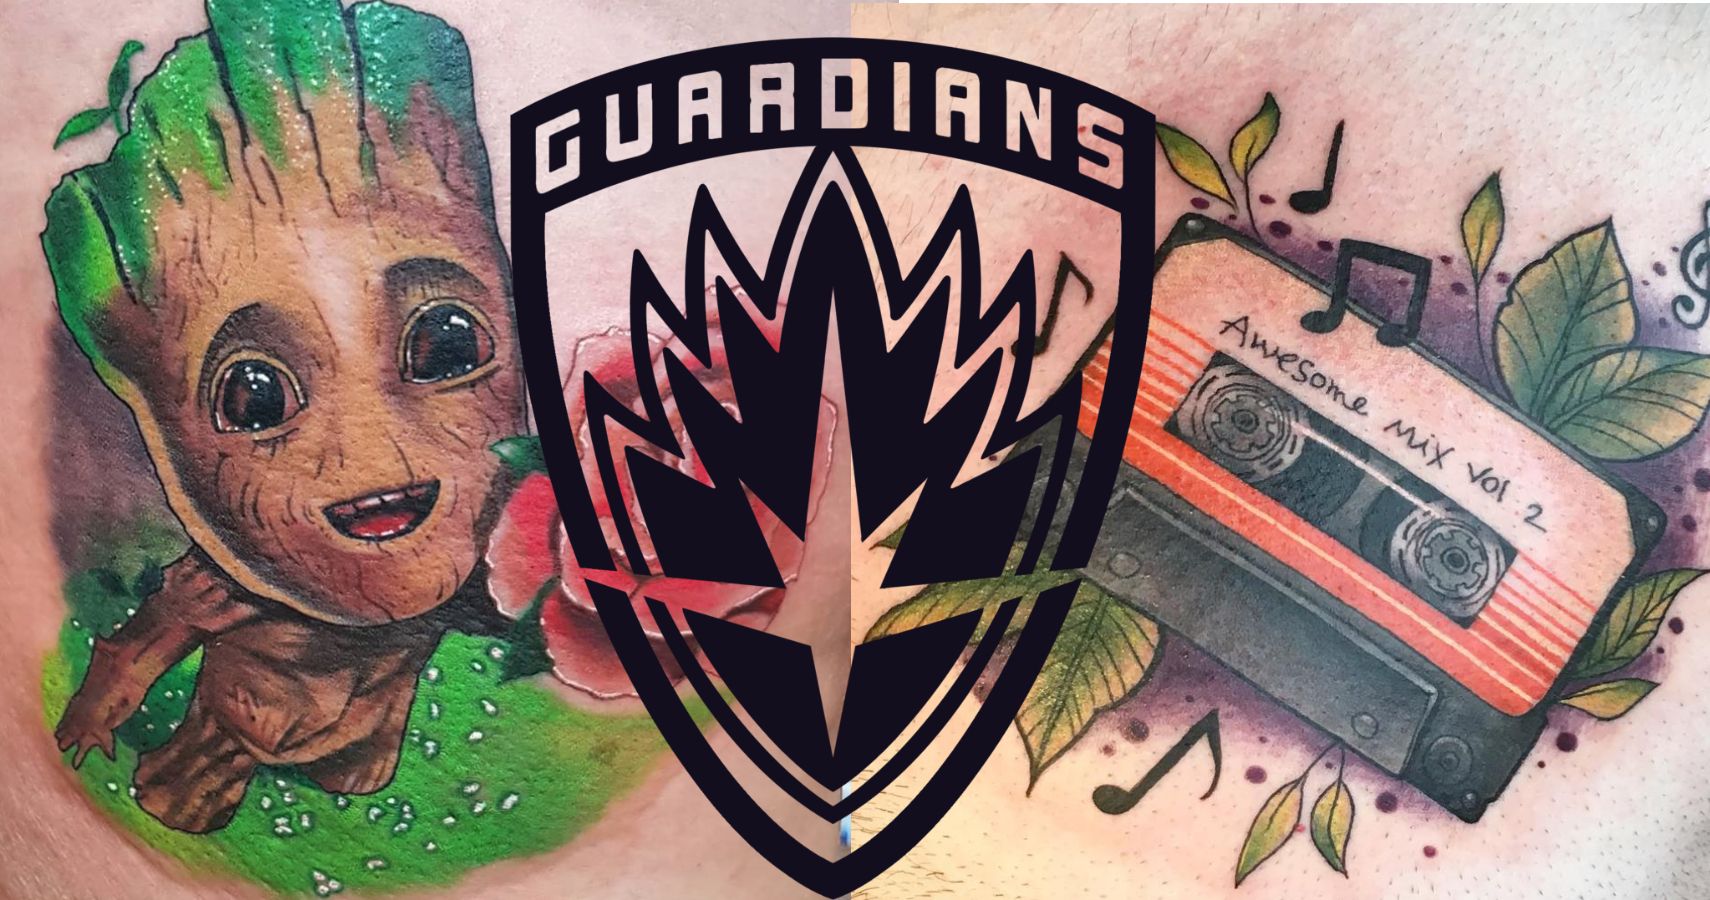 Tattoo uploaded by Lisabar897  Groot from Guardian of the Galaxy tattoo  by Kristina Taylor groot guardiansofthegalaxy kristinataylor  Tattoodo